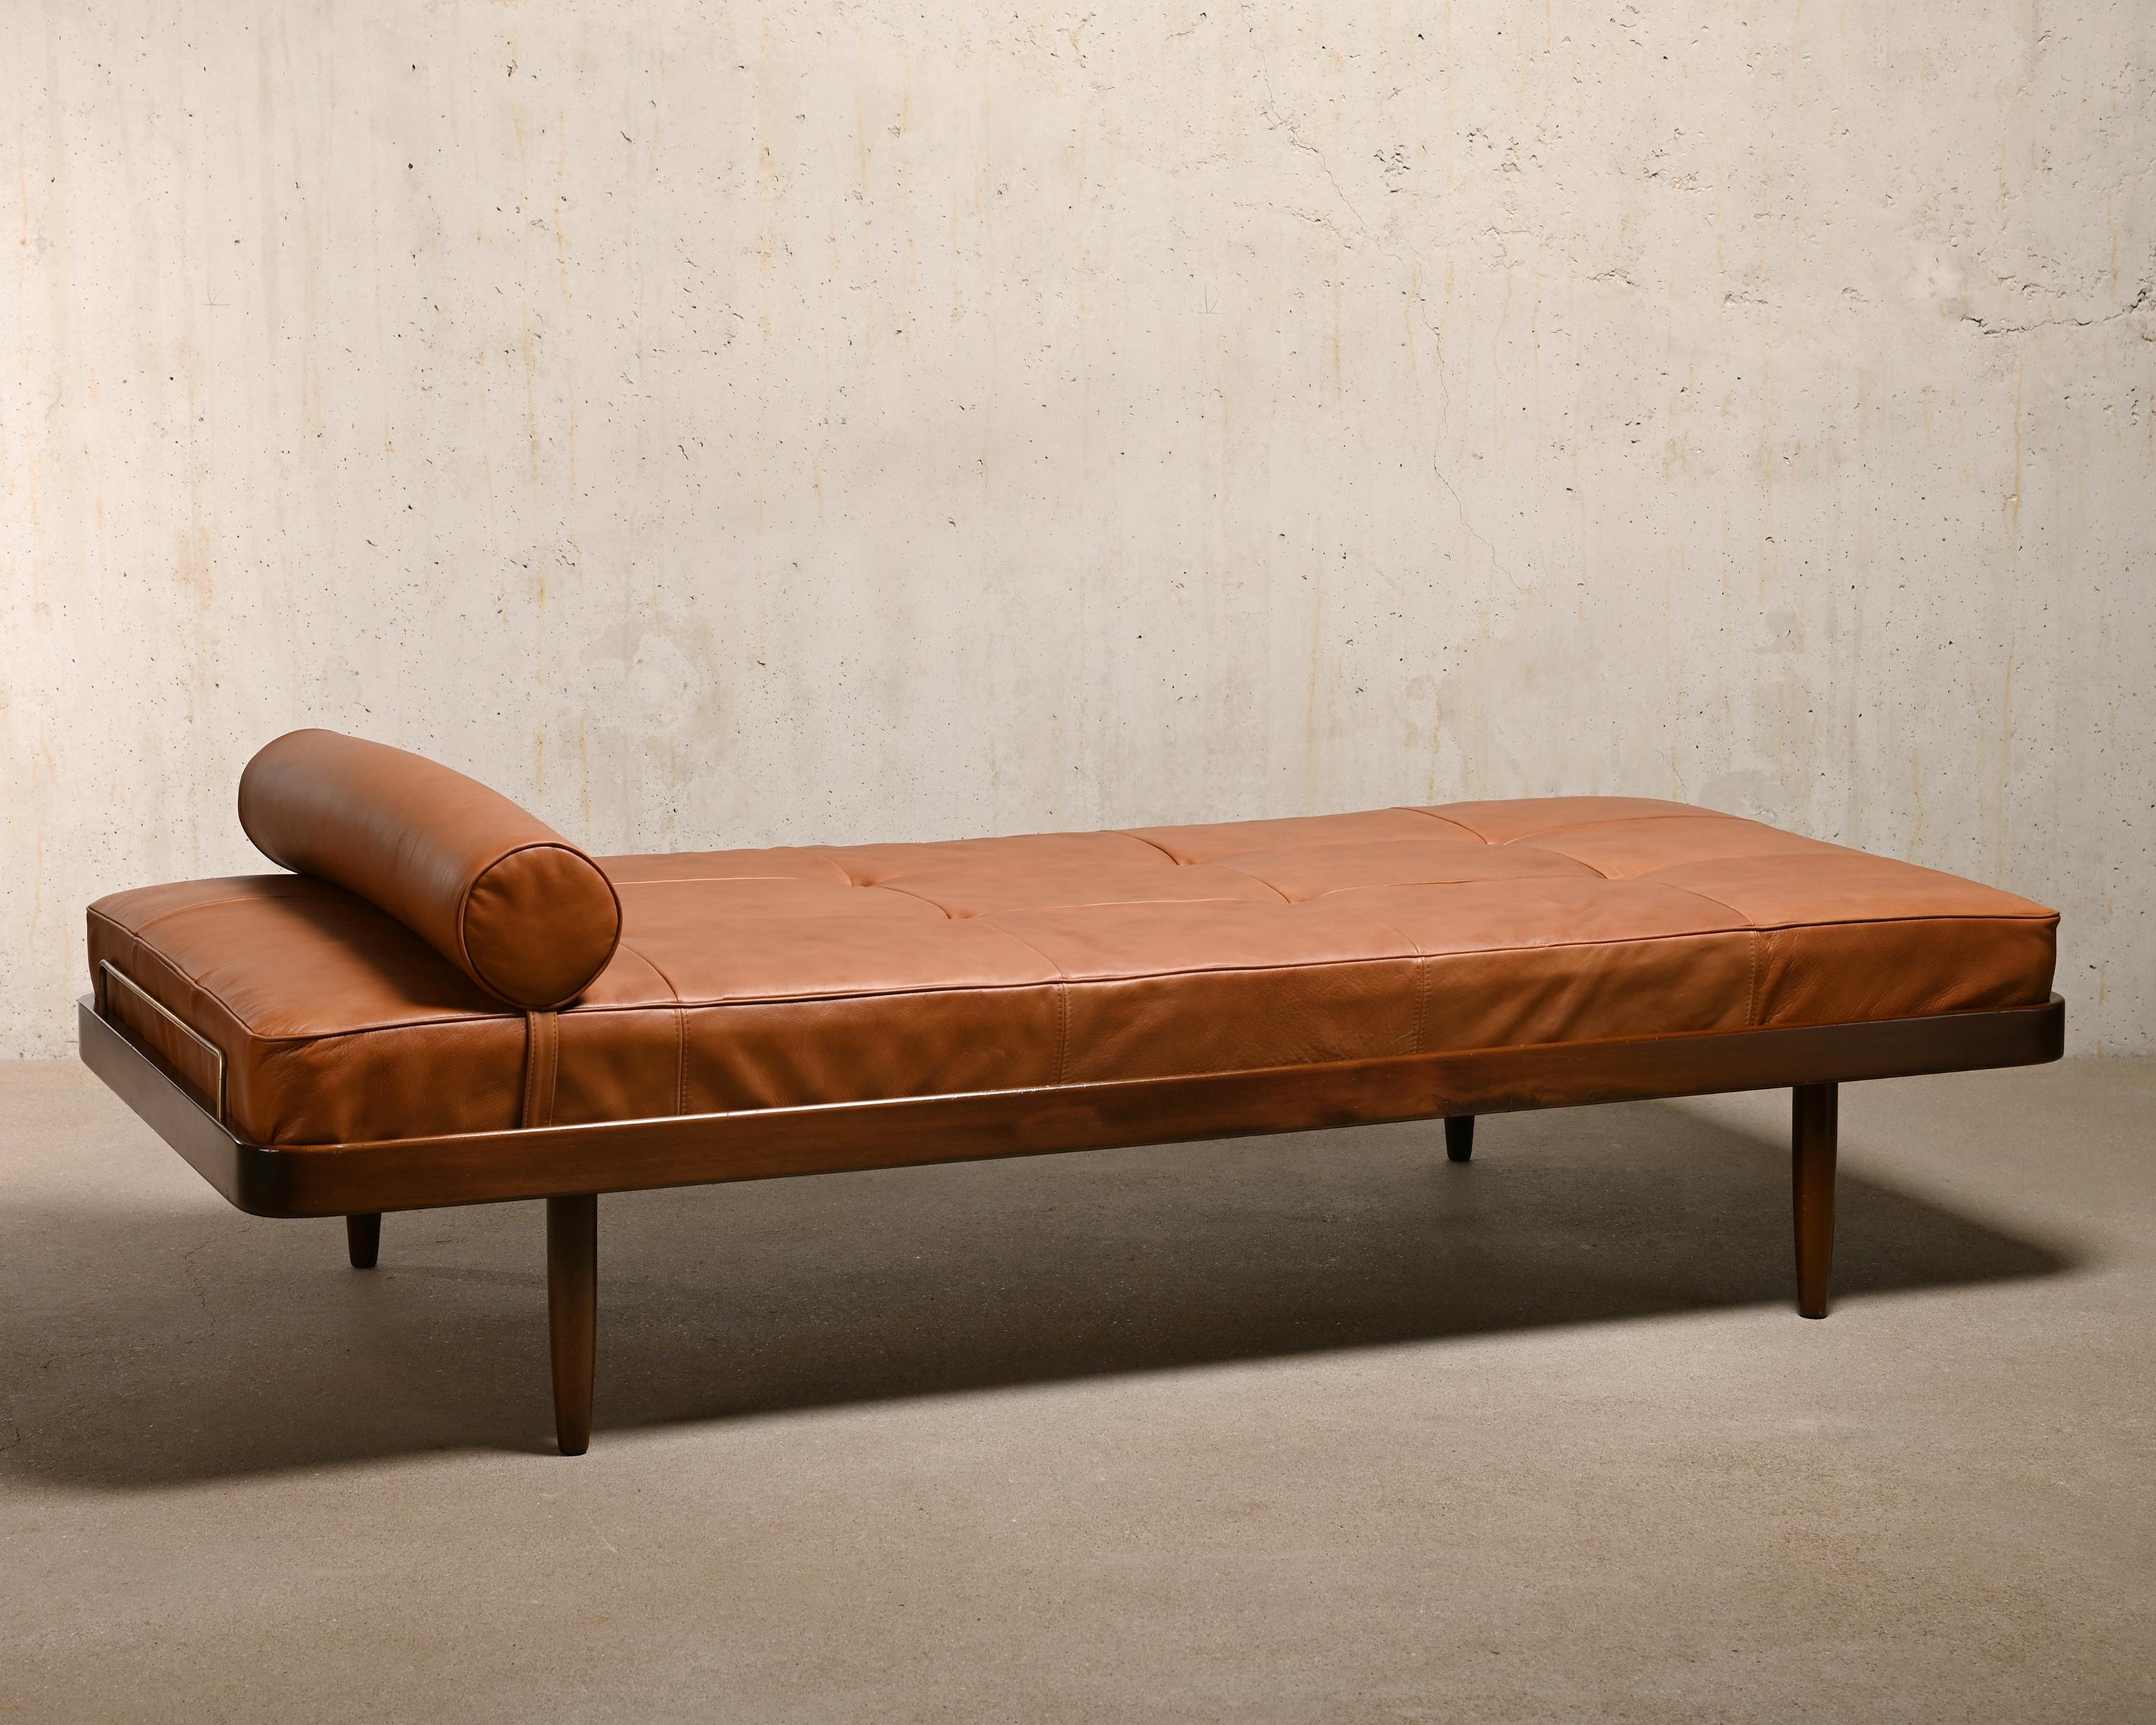 Scandinavian Daybed in Cognac leather manufactured by Horsens Møbelfabrik Denmark in the sixties. Dark stained wood in good condition with slight signs of use and ageing. The frame has nice details with rounded corners, brass brackets and tapered